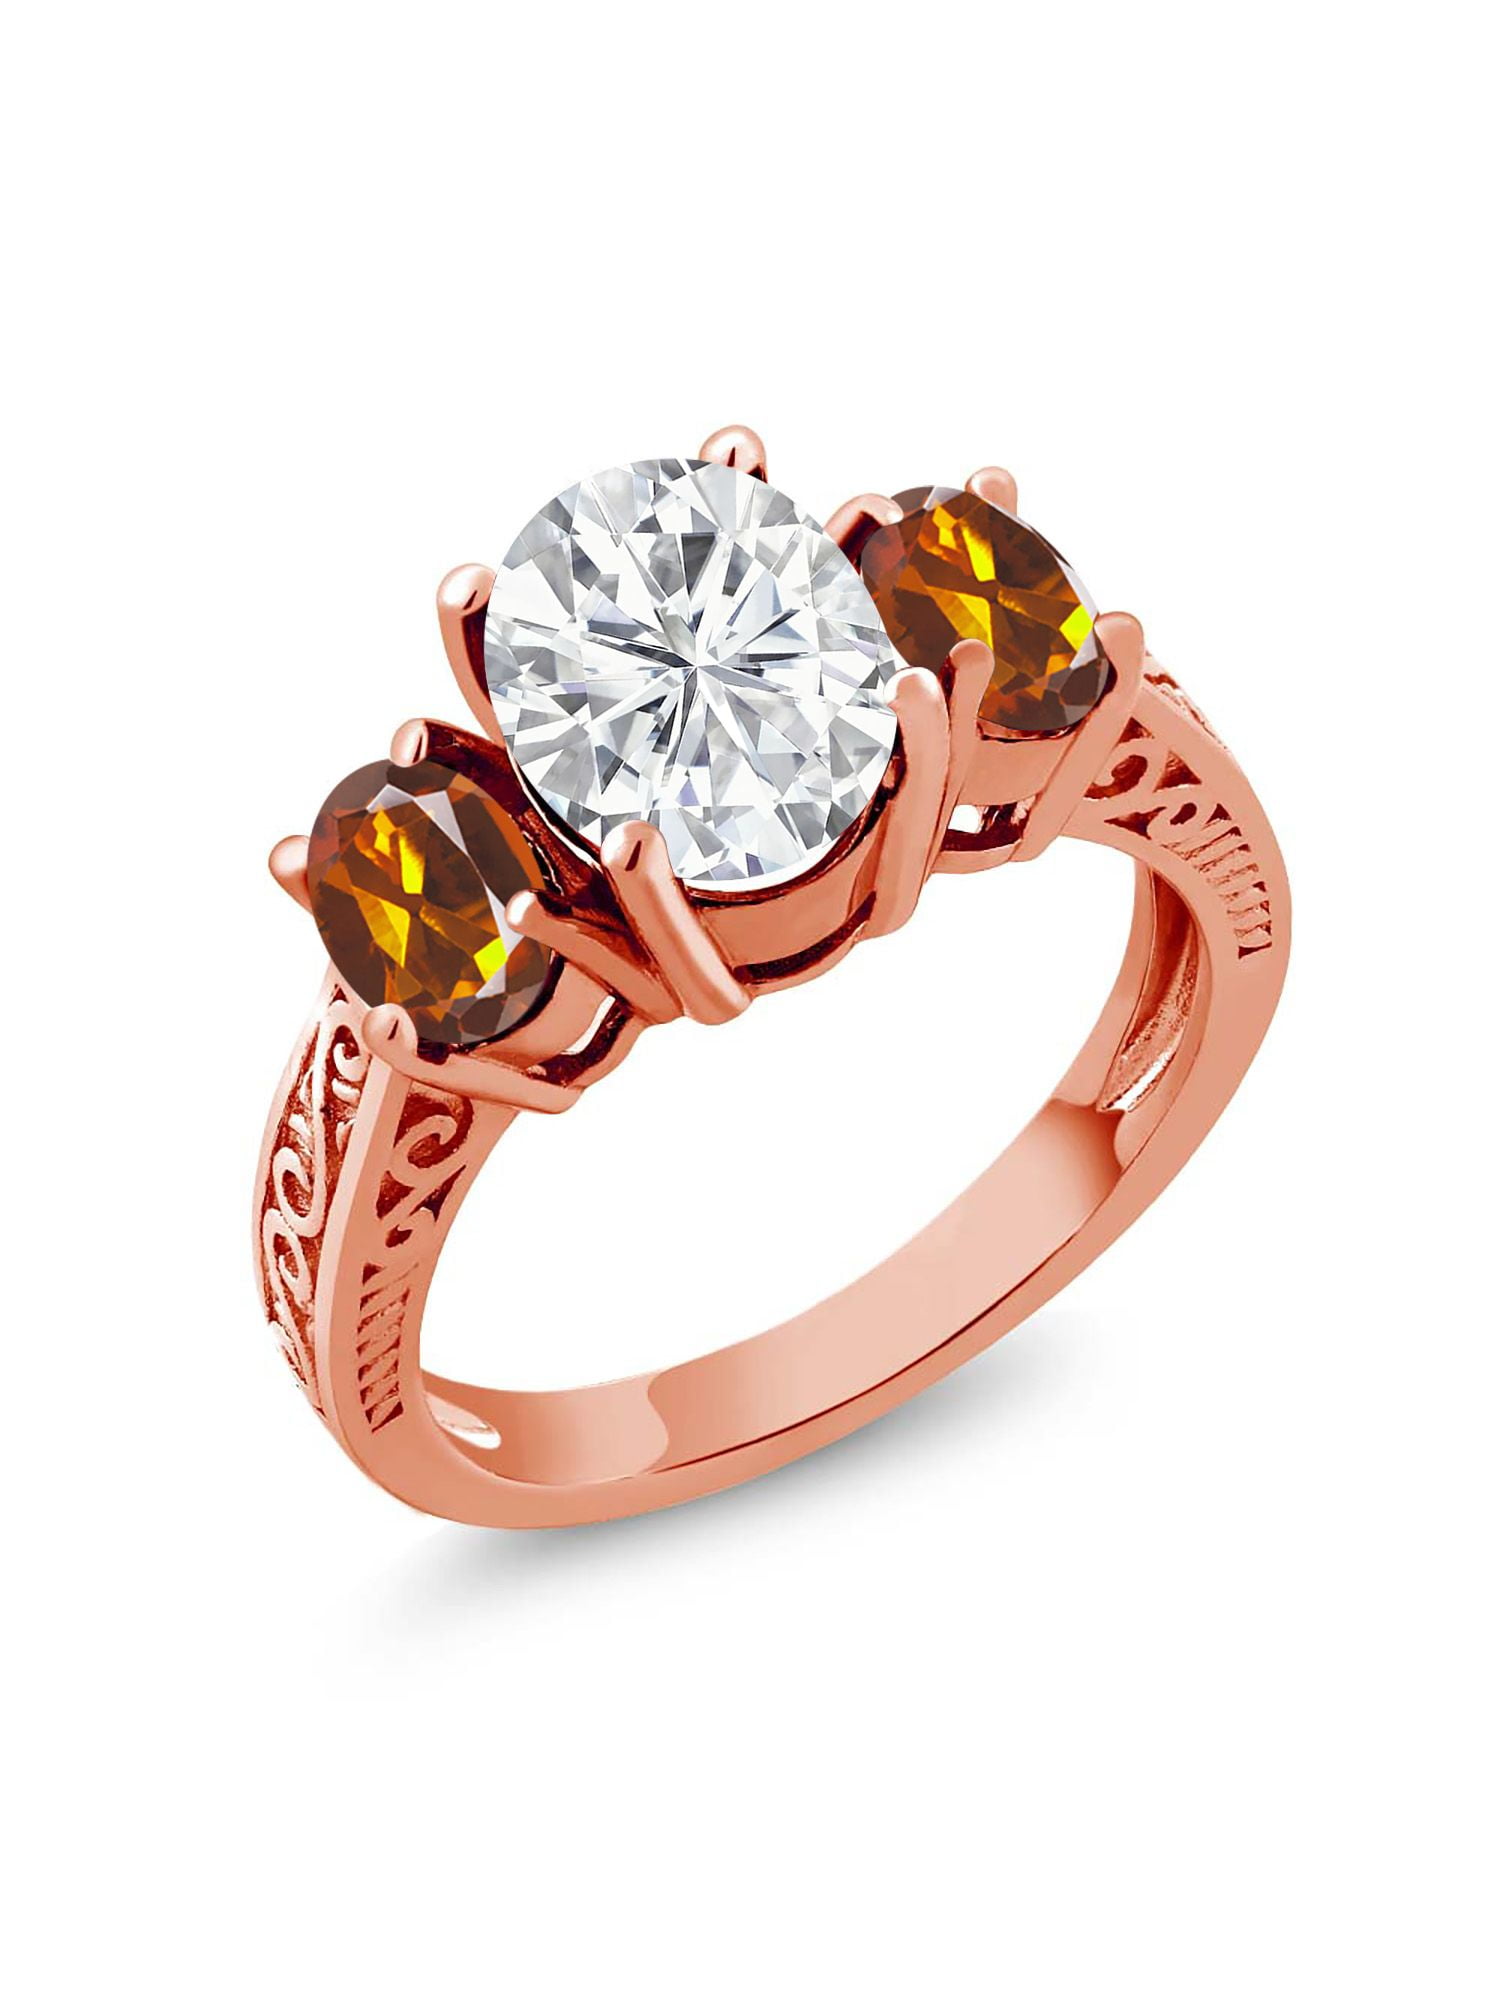 Gold & Diamonds Jewellery 2.9CT Brilliant Round Cut Red Garnet 3-Stone Band Ring 14k Gold Over .925 Sterling Silver Solitaire Anniversary Engagement Promise Ring for Womens